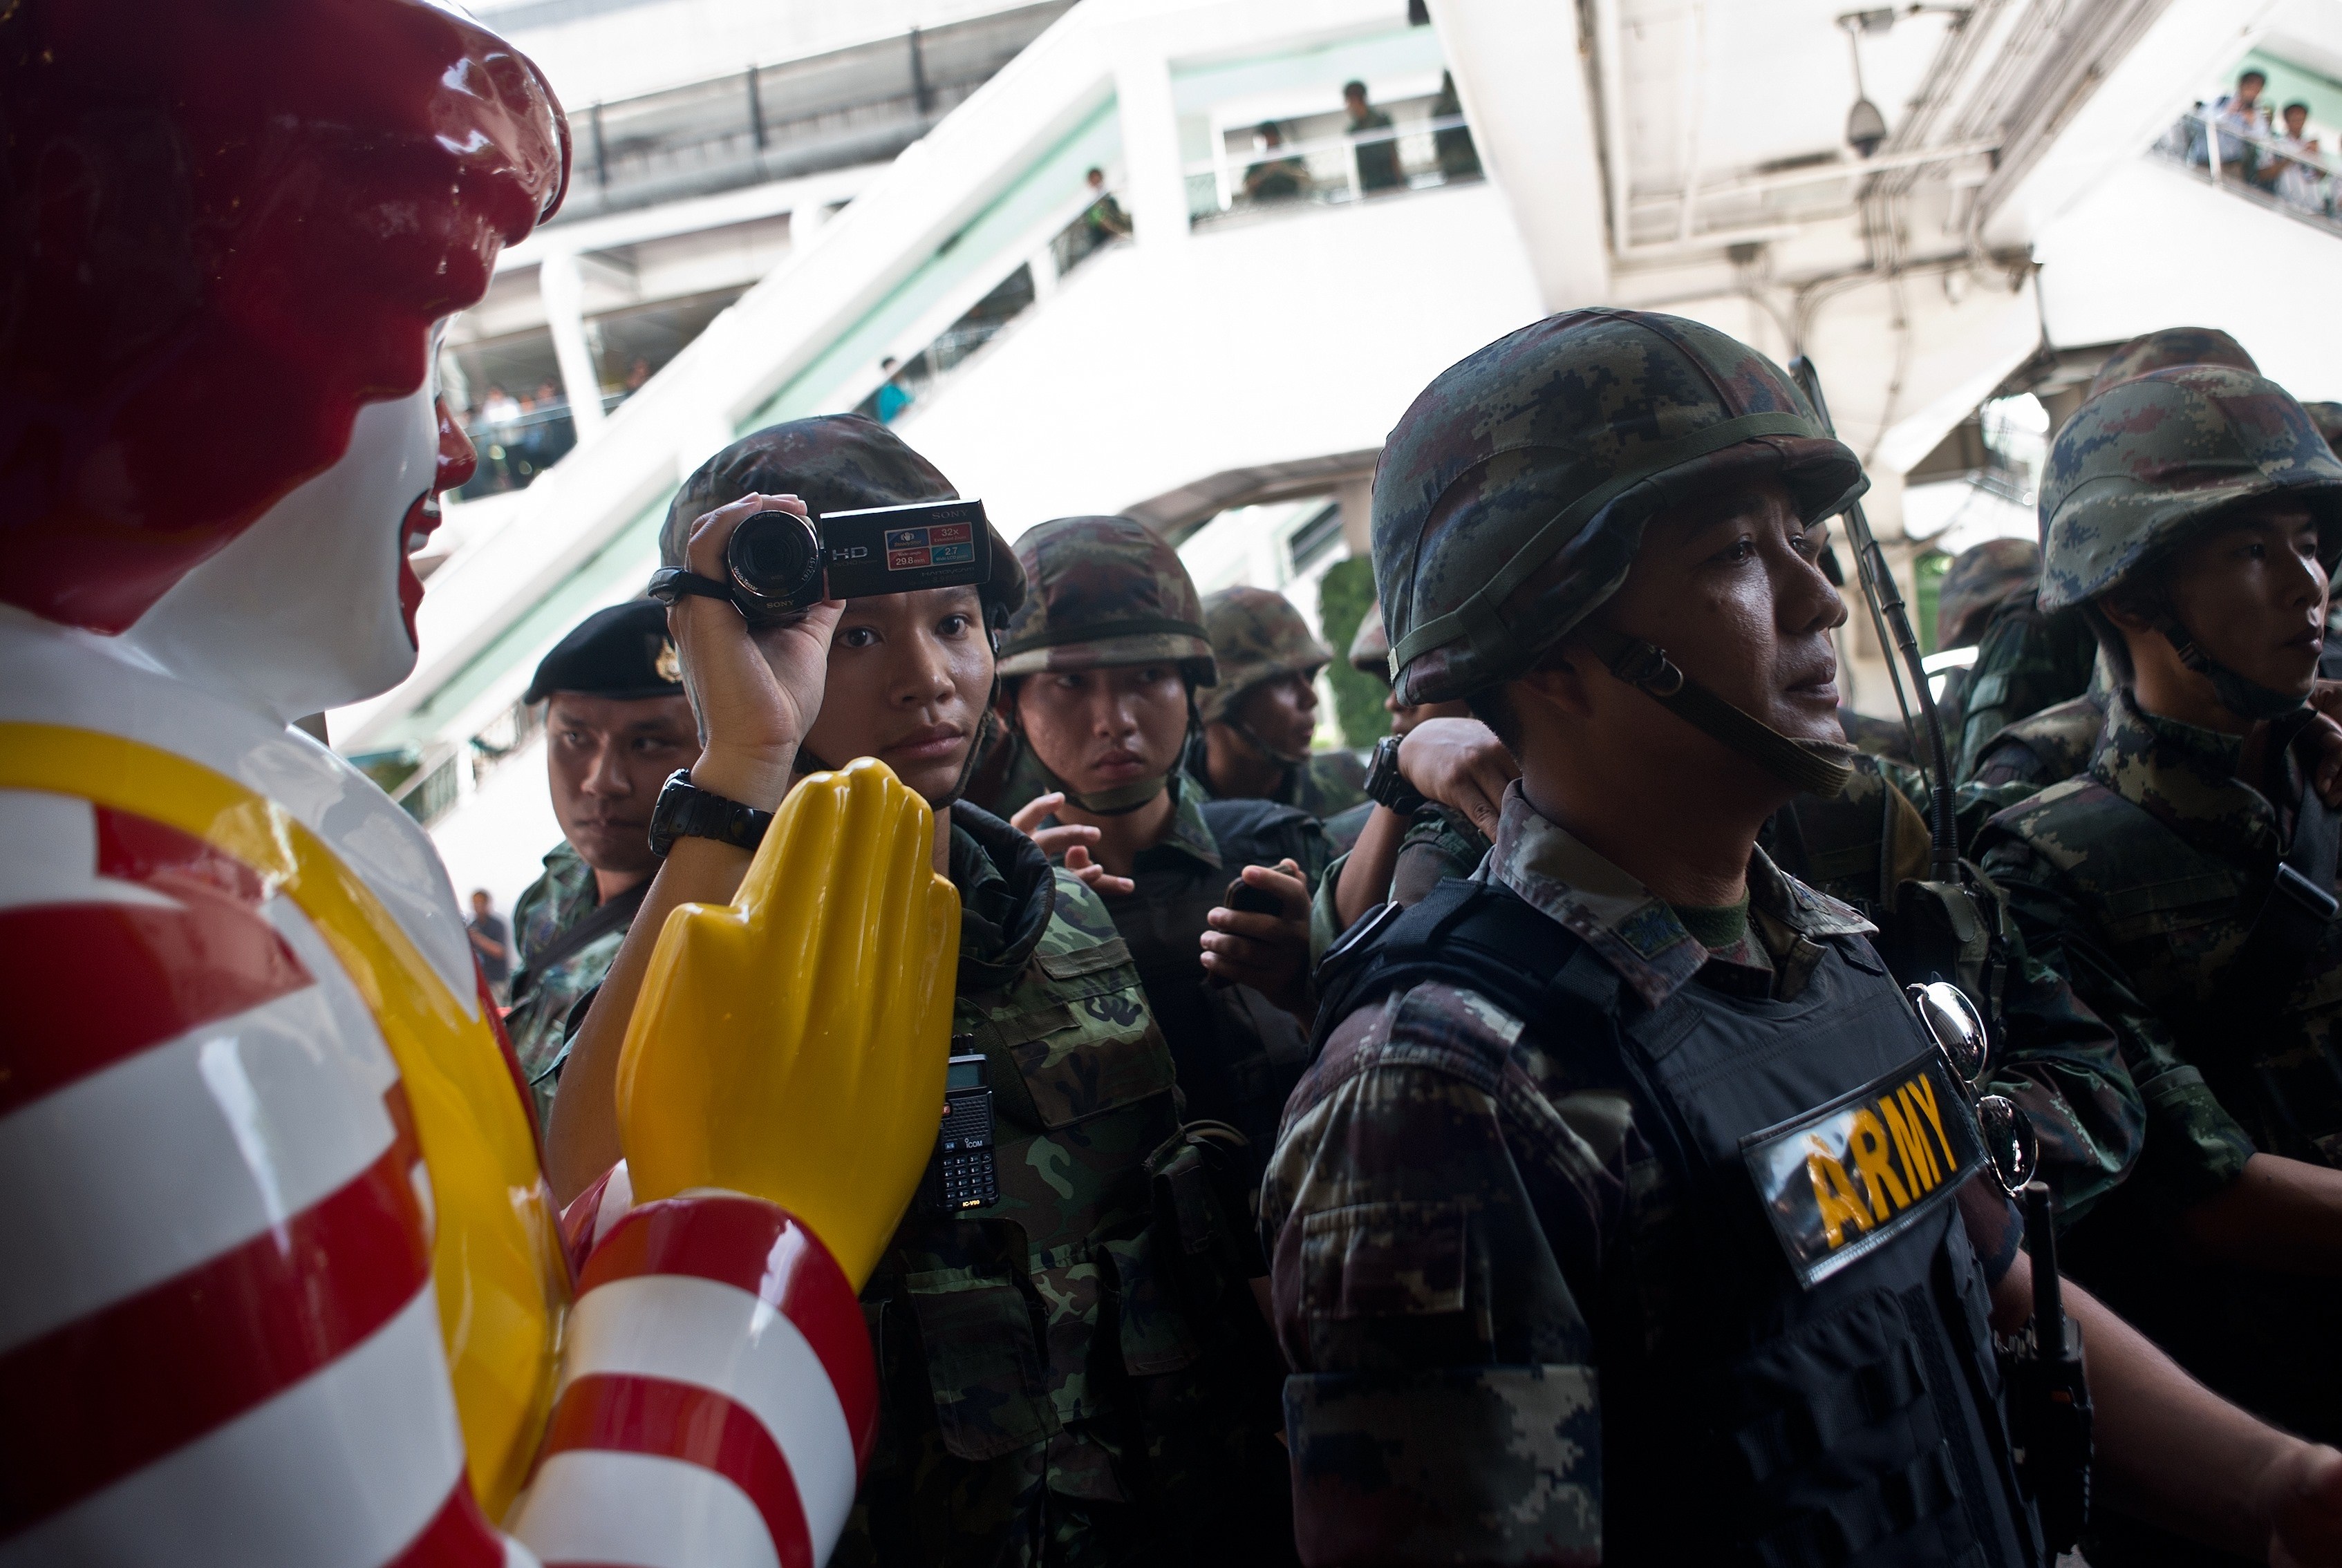 Thai-army soldiers stand guard outside a McDonalds outlet ahead of a planned gathering in Bangkok on May 25, 2014. (MANAN VATSYAYANA—AFP/Getty Images)